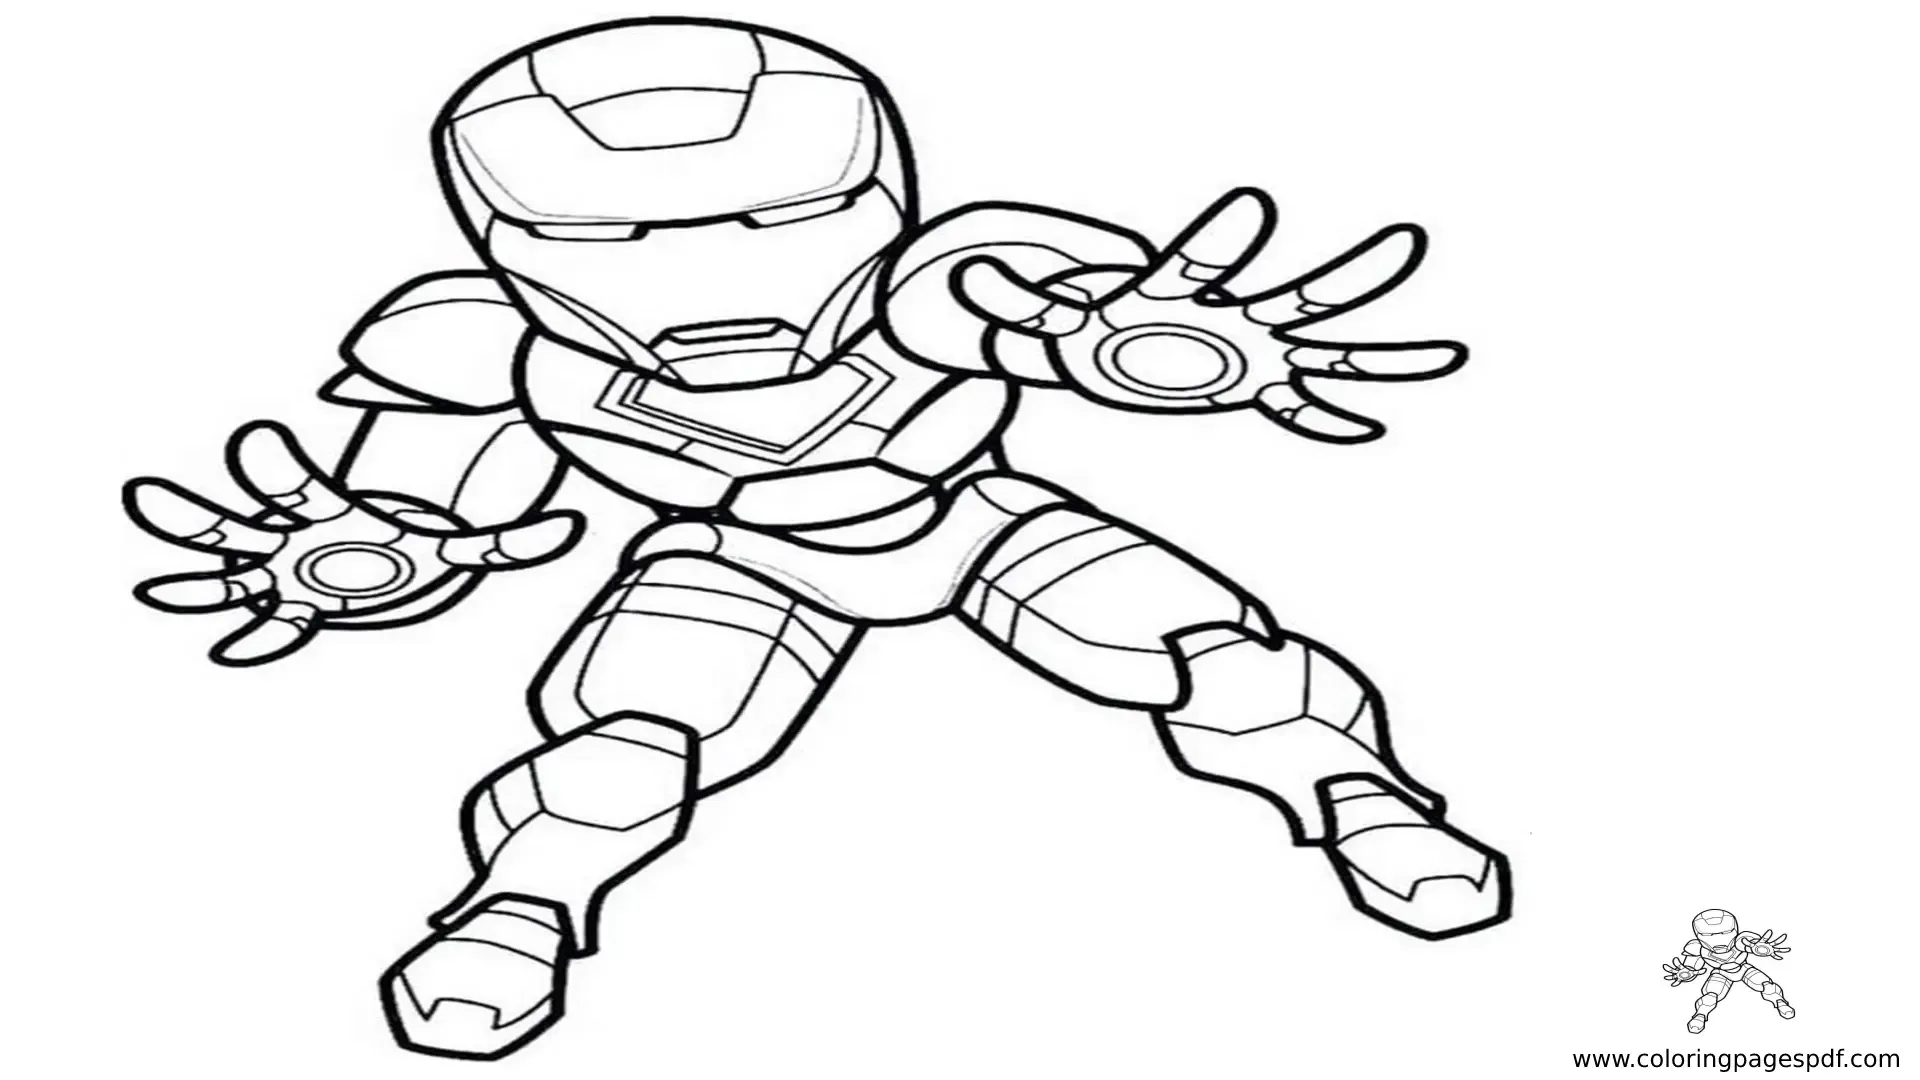 Coloring Pages Of Mini Iron Man